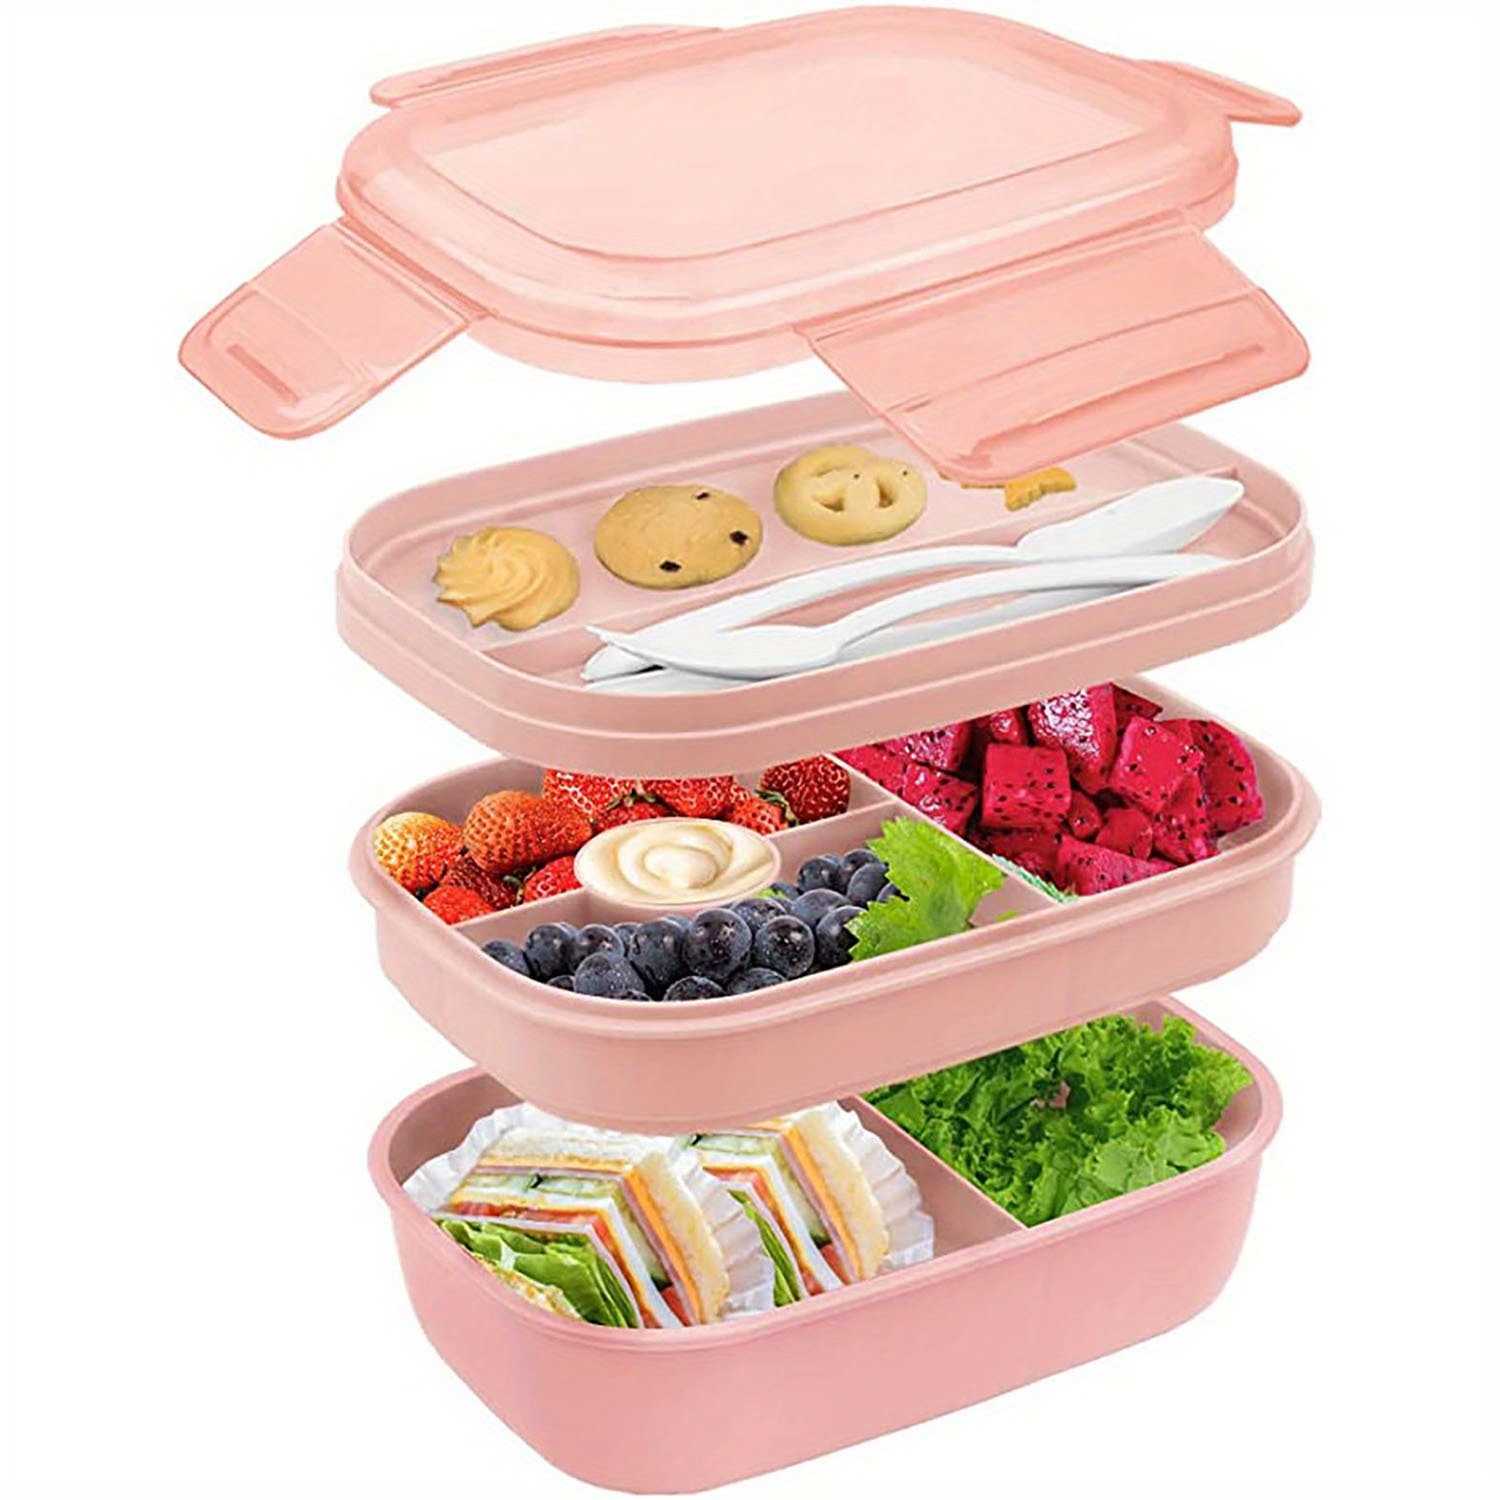 Pink Large capacity Reusable Bento Lunch Box - Durable Plastic Meal Prep  Containers Perfect for School, Work, and Travel!